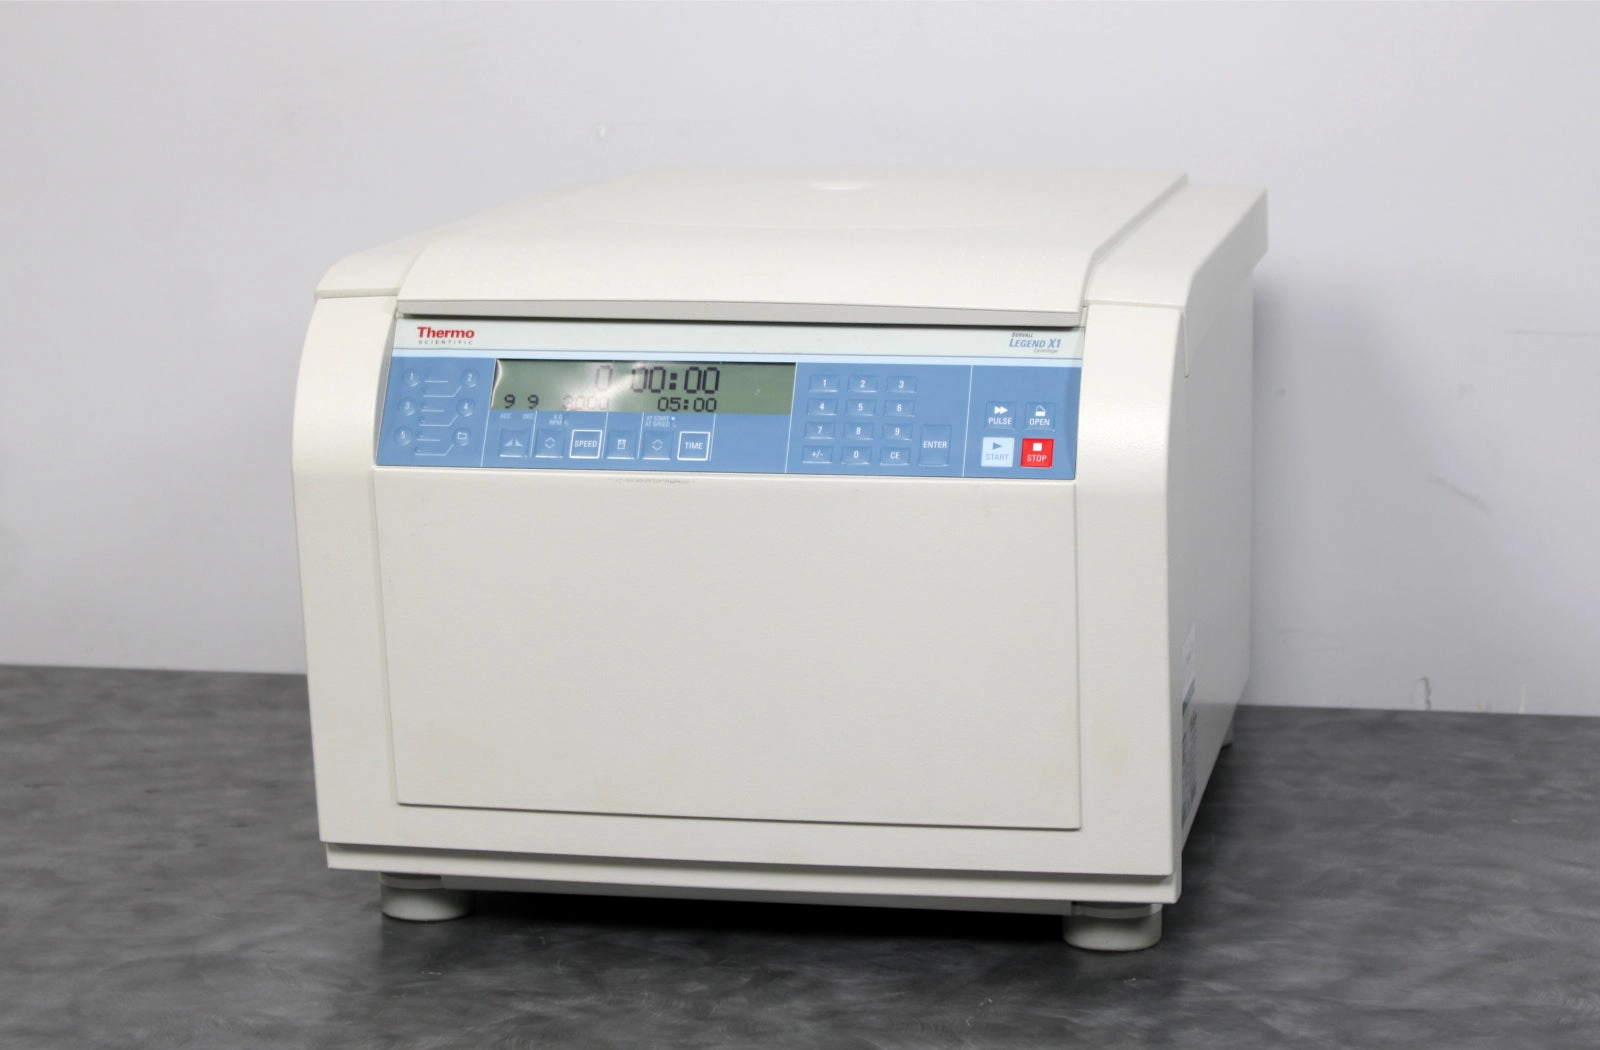 Thermo Scientific Legend X1 Benchtop Centrifuge With Swing Bucket Rotor